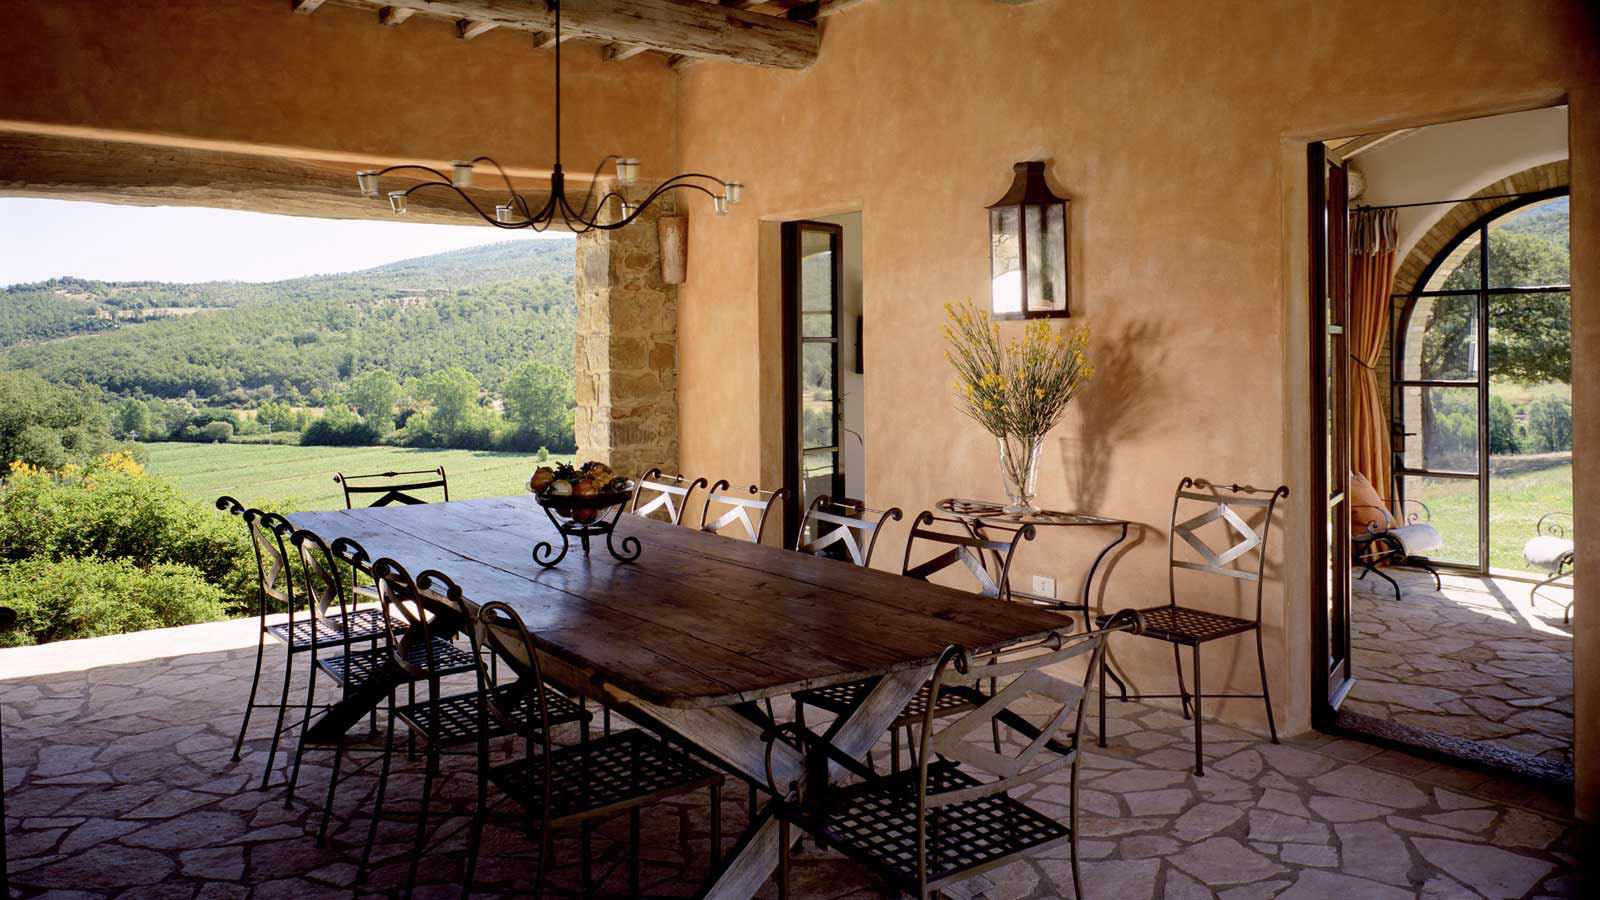 Umbrian Country Terrace